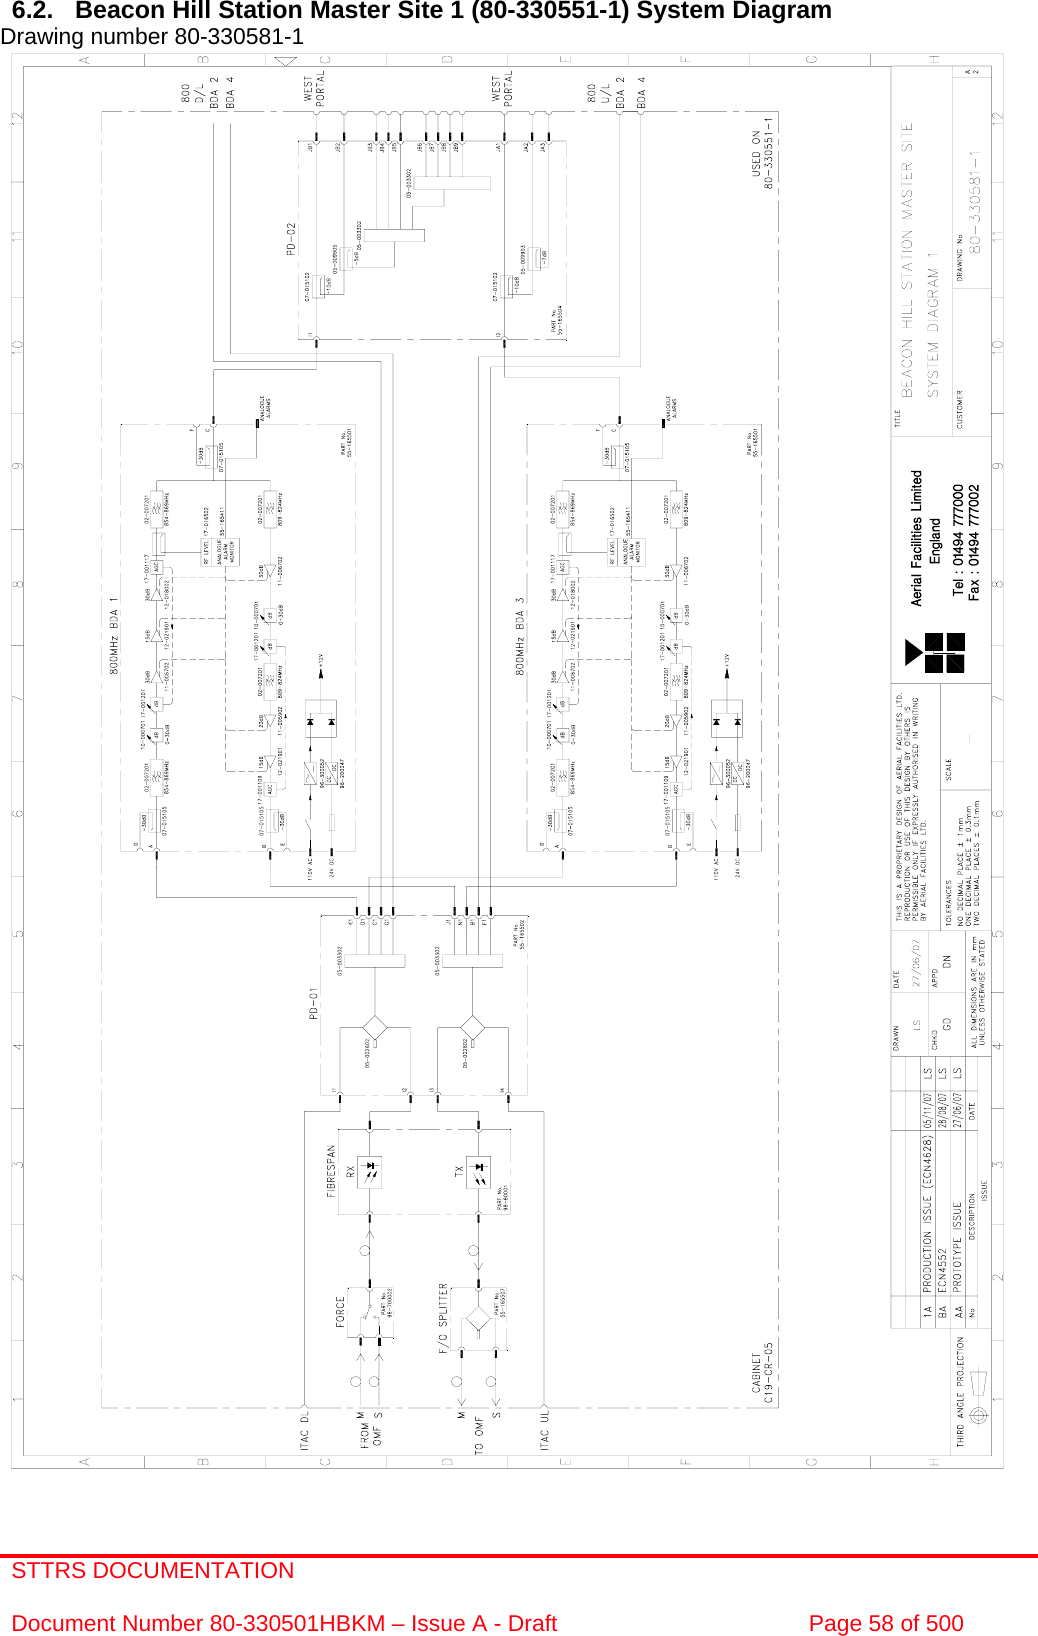 STTRS DOCUMENTATION  Document Number 80-330501HBKM – Issue A - Draft  Page 58 of 500   6.2.  Beacon Hill Station Master Site 1 (80-330551-1) System Diagram Drawing number 80-330581-1                                                       